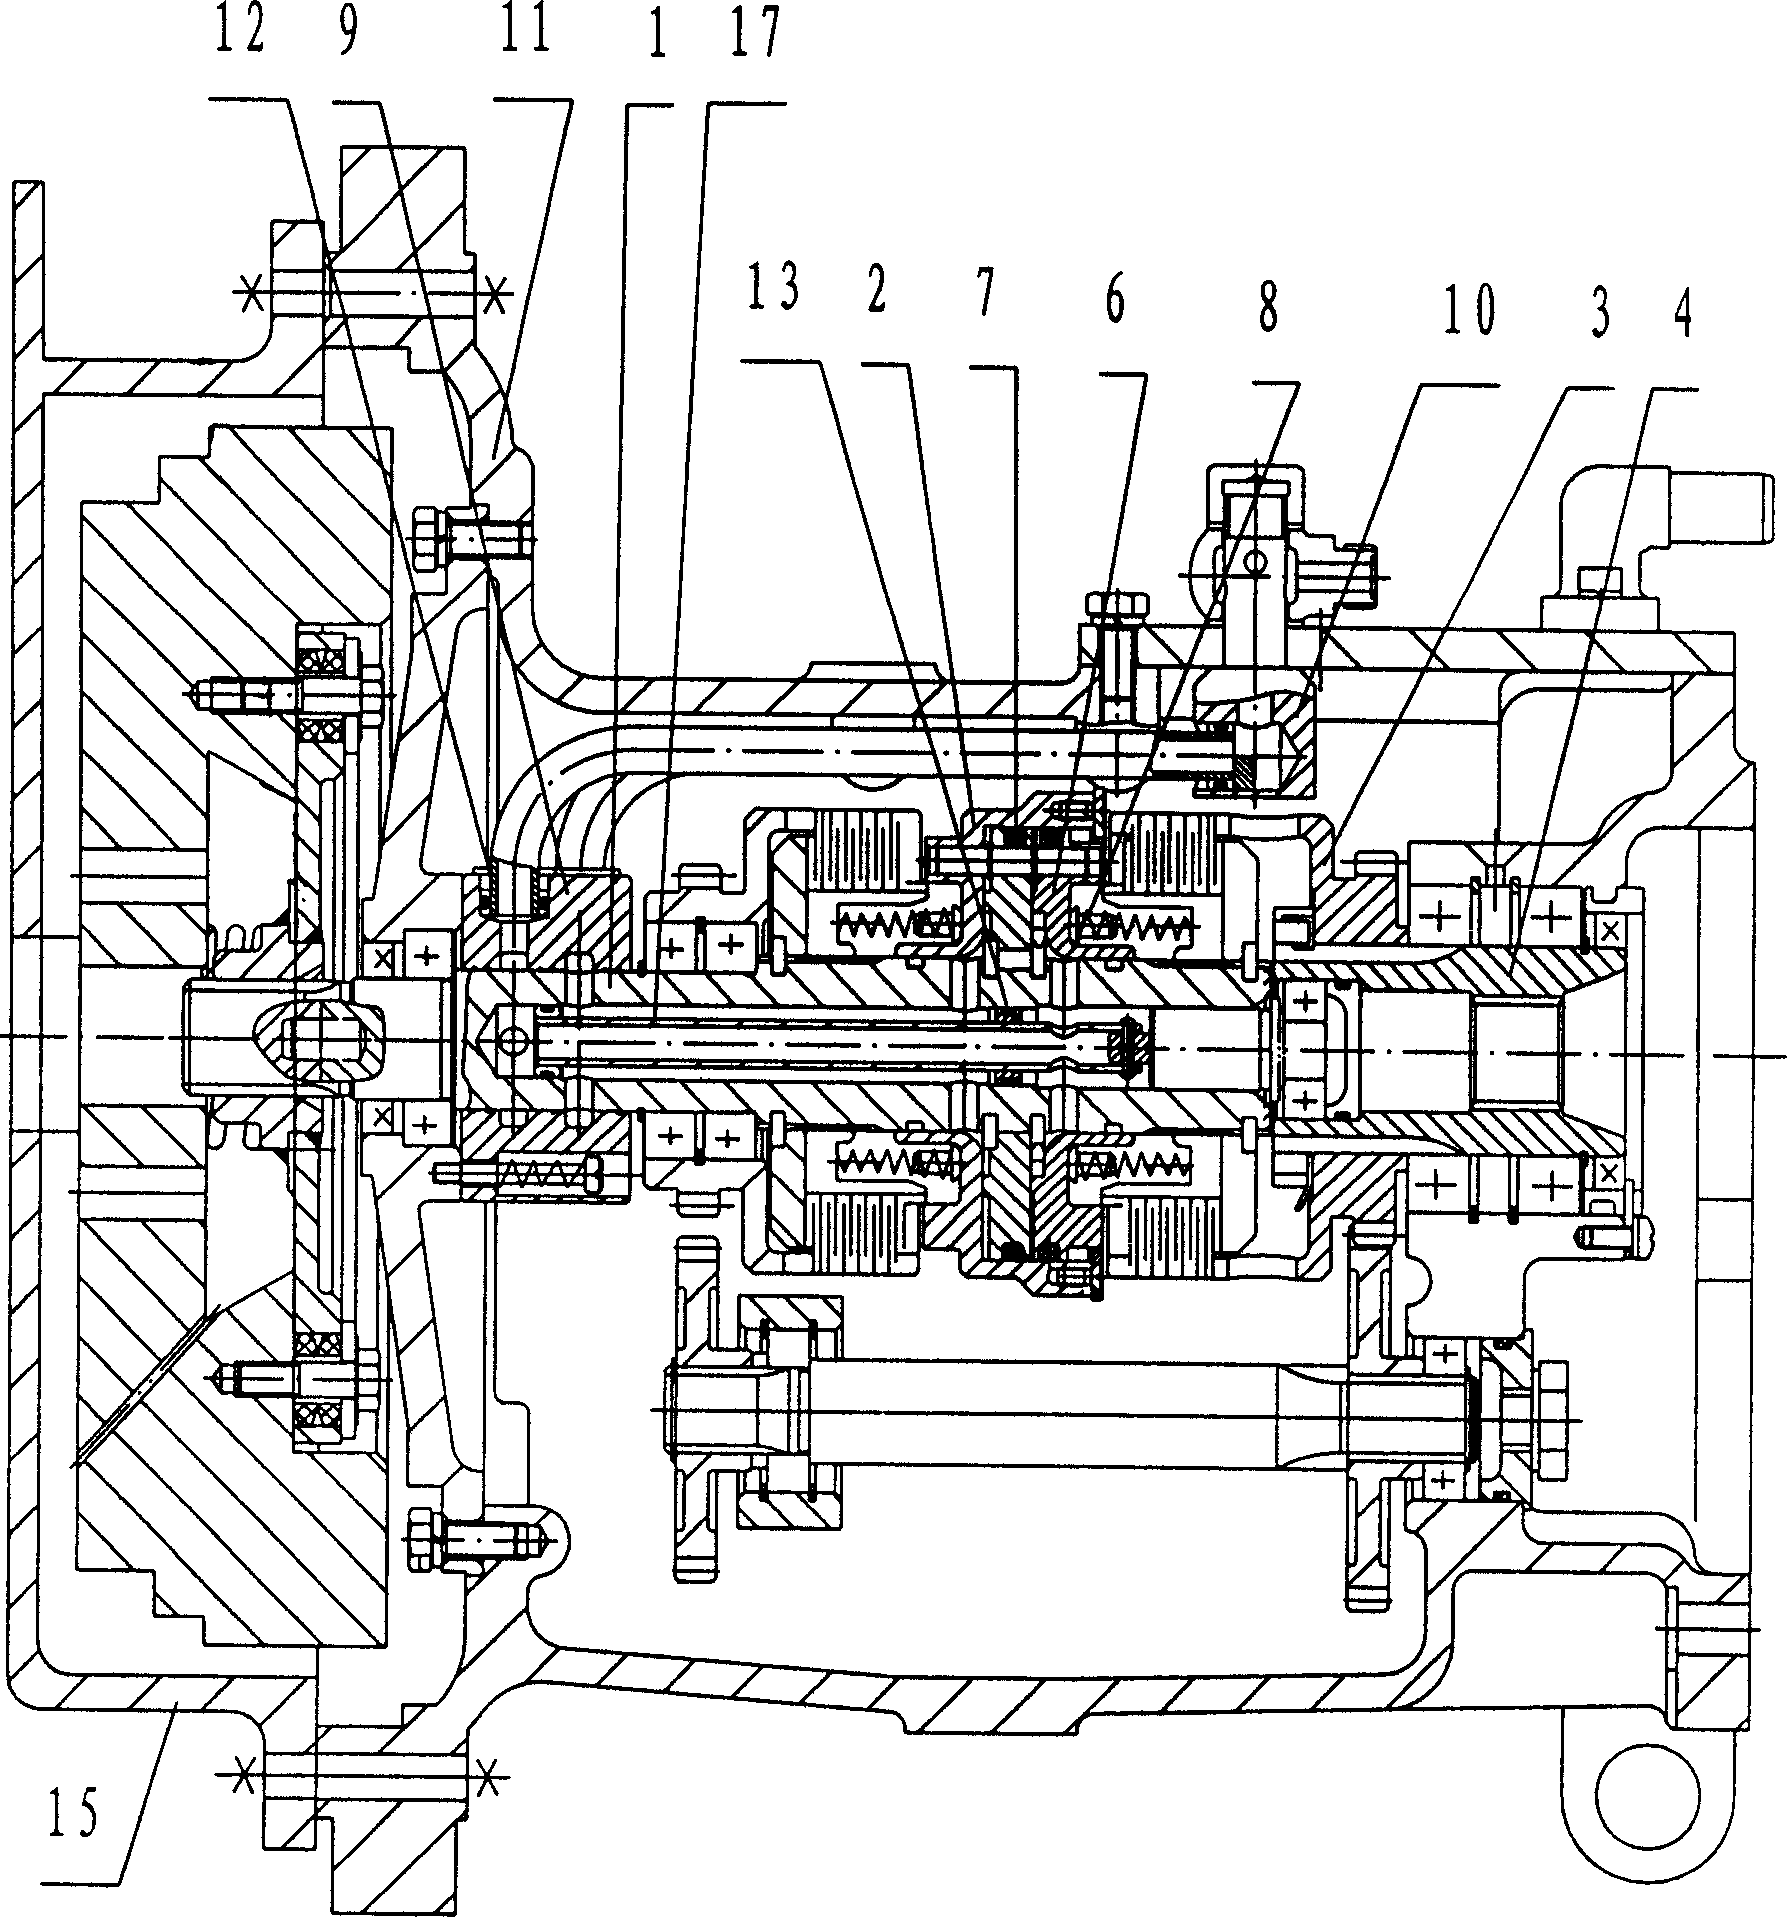 Hydraulic commutation clutch and multifunctional tractor employing the same